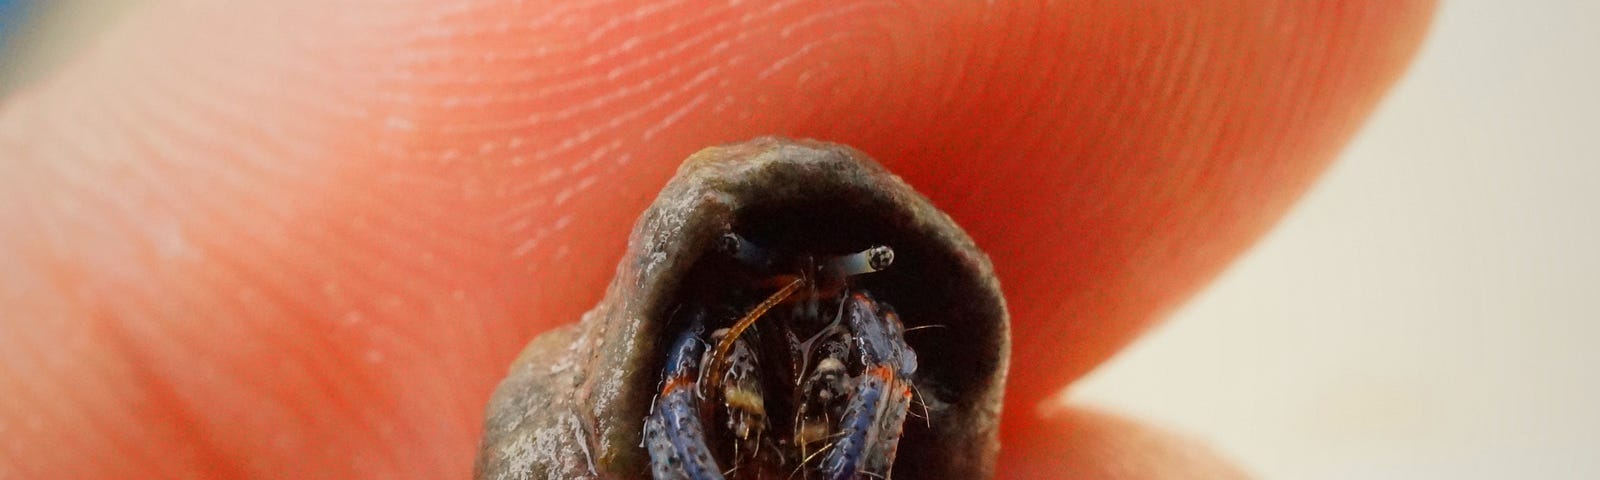 Close up of fingers holding a tiny hermit crab in its shell